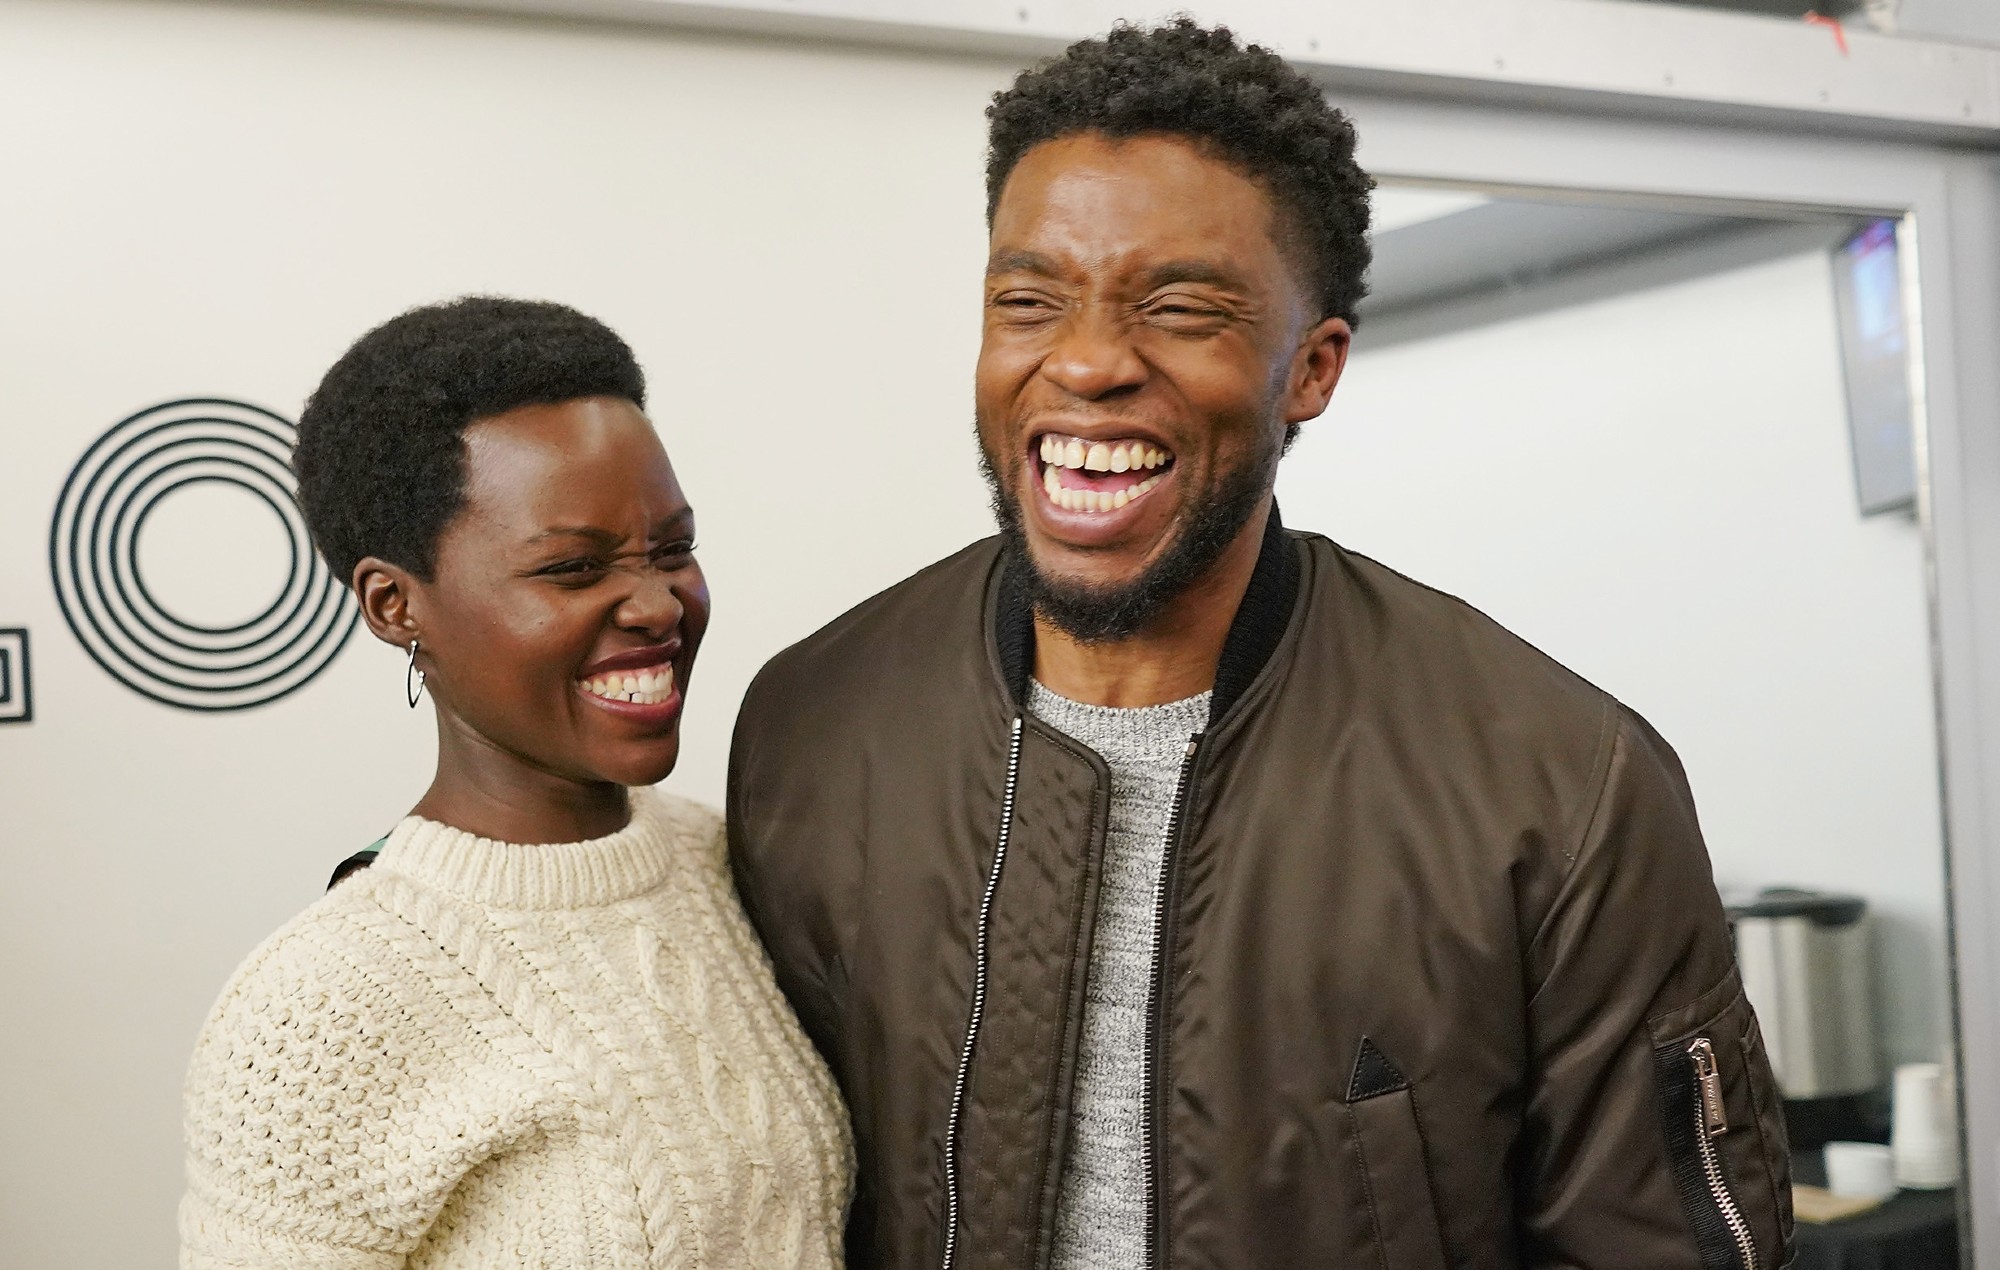 Lupita Nyong’o says ‘A Quiet Place’ storyline was “therapeutic” after Chadwick Boseman’s death